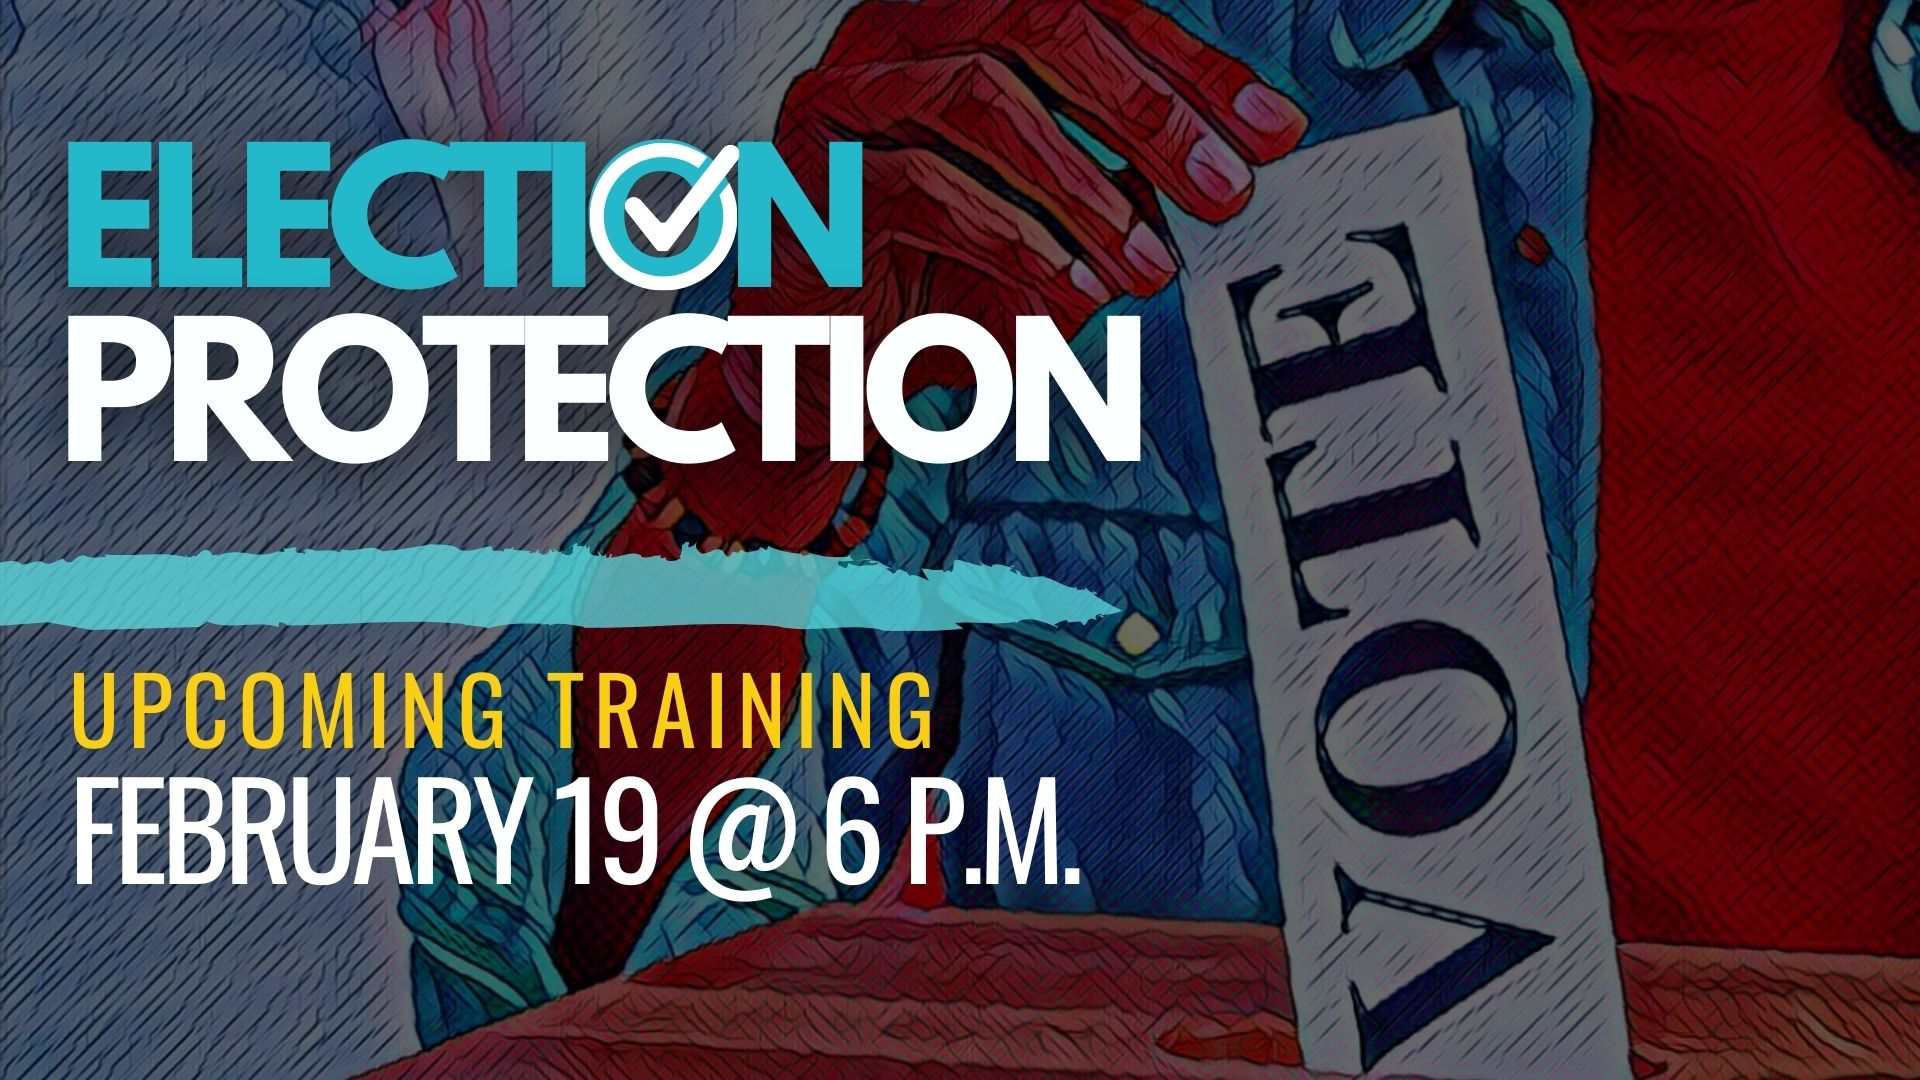 Election protection training on February 19 at 6 pm via zoom.